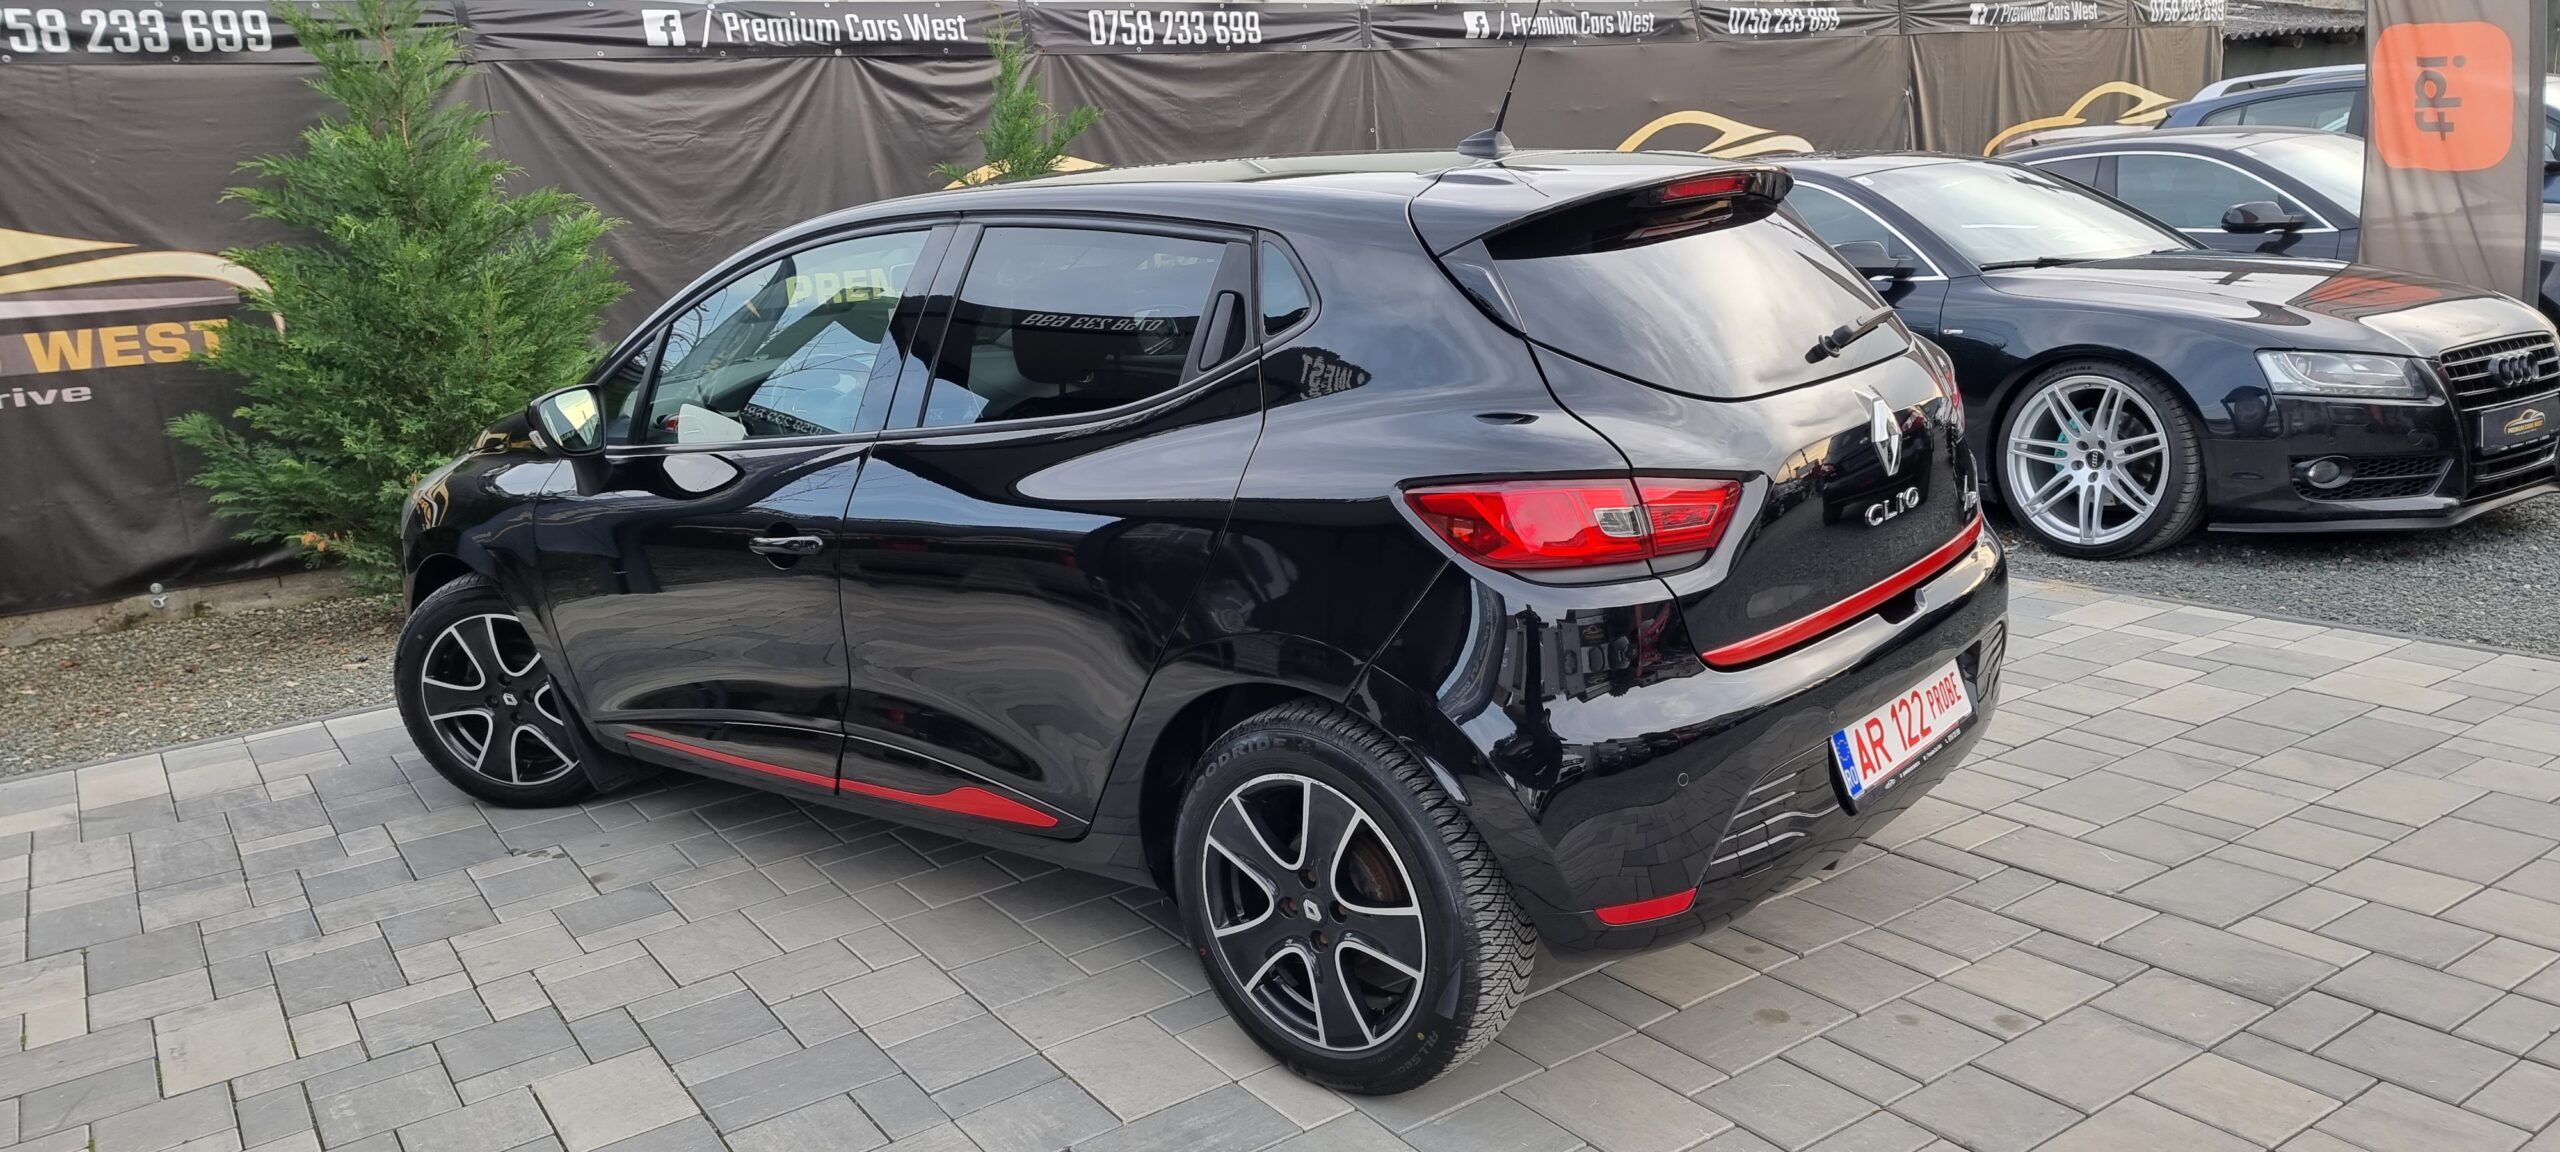 RENAULT CLIO, 0.9 TCE, 90 CP, EURO 5, AN 2013